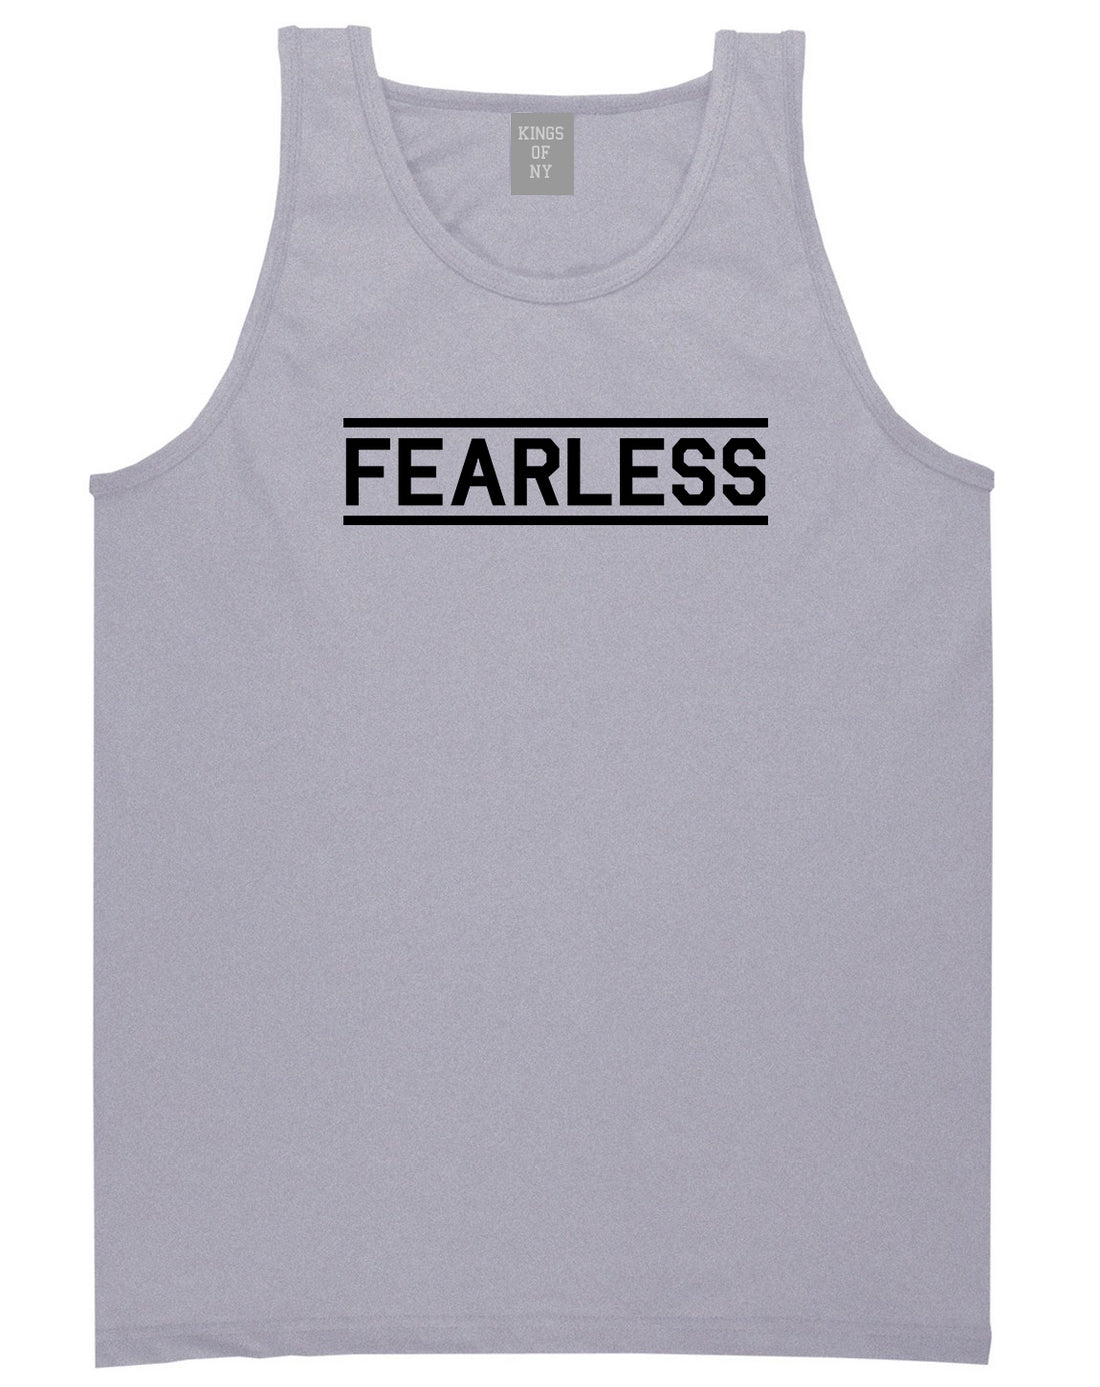 Fearless Gym Mens Grey Tank Top Shirt by KINGS OF NY